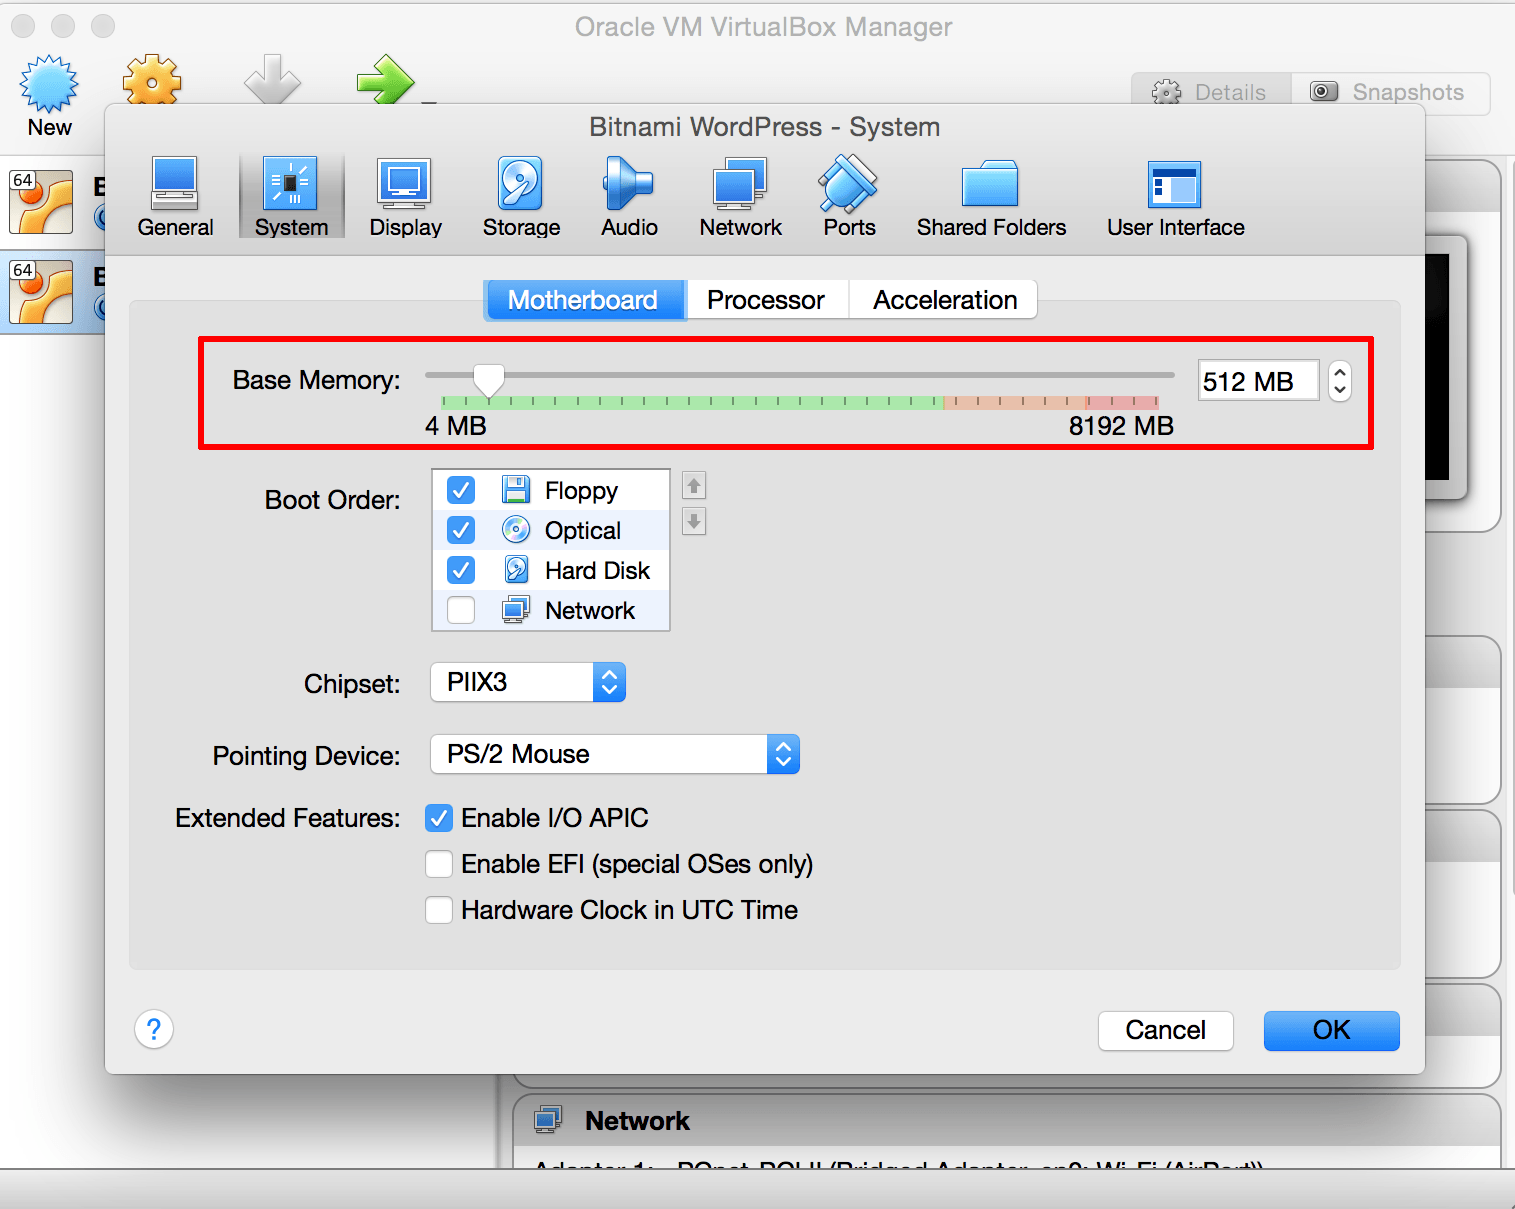 Reduce the memory space allocated to the virtual machine